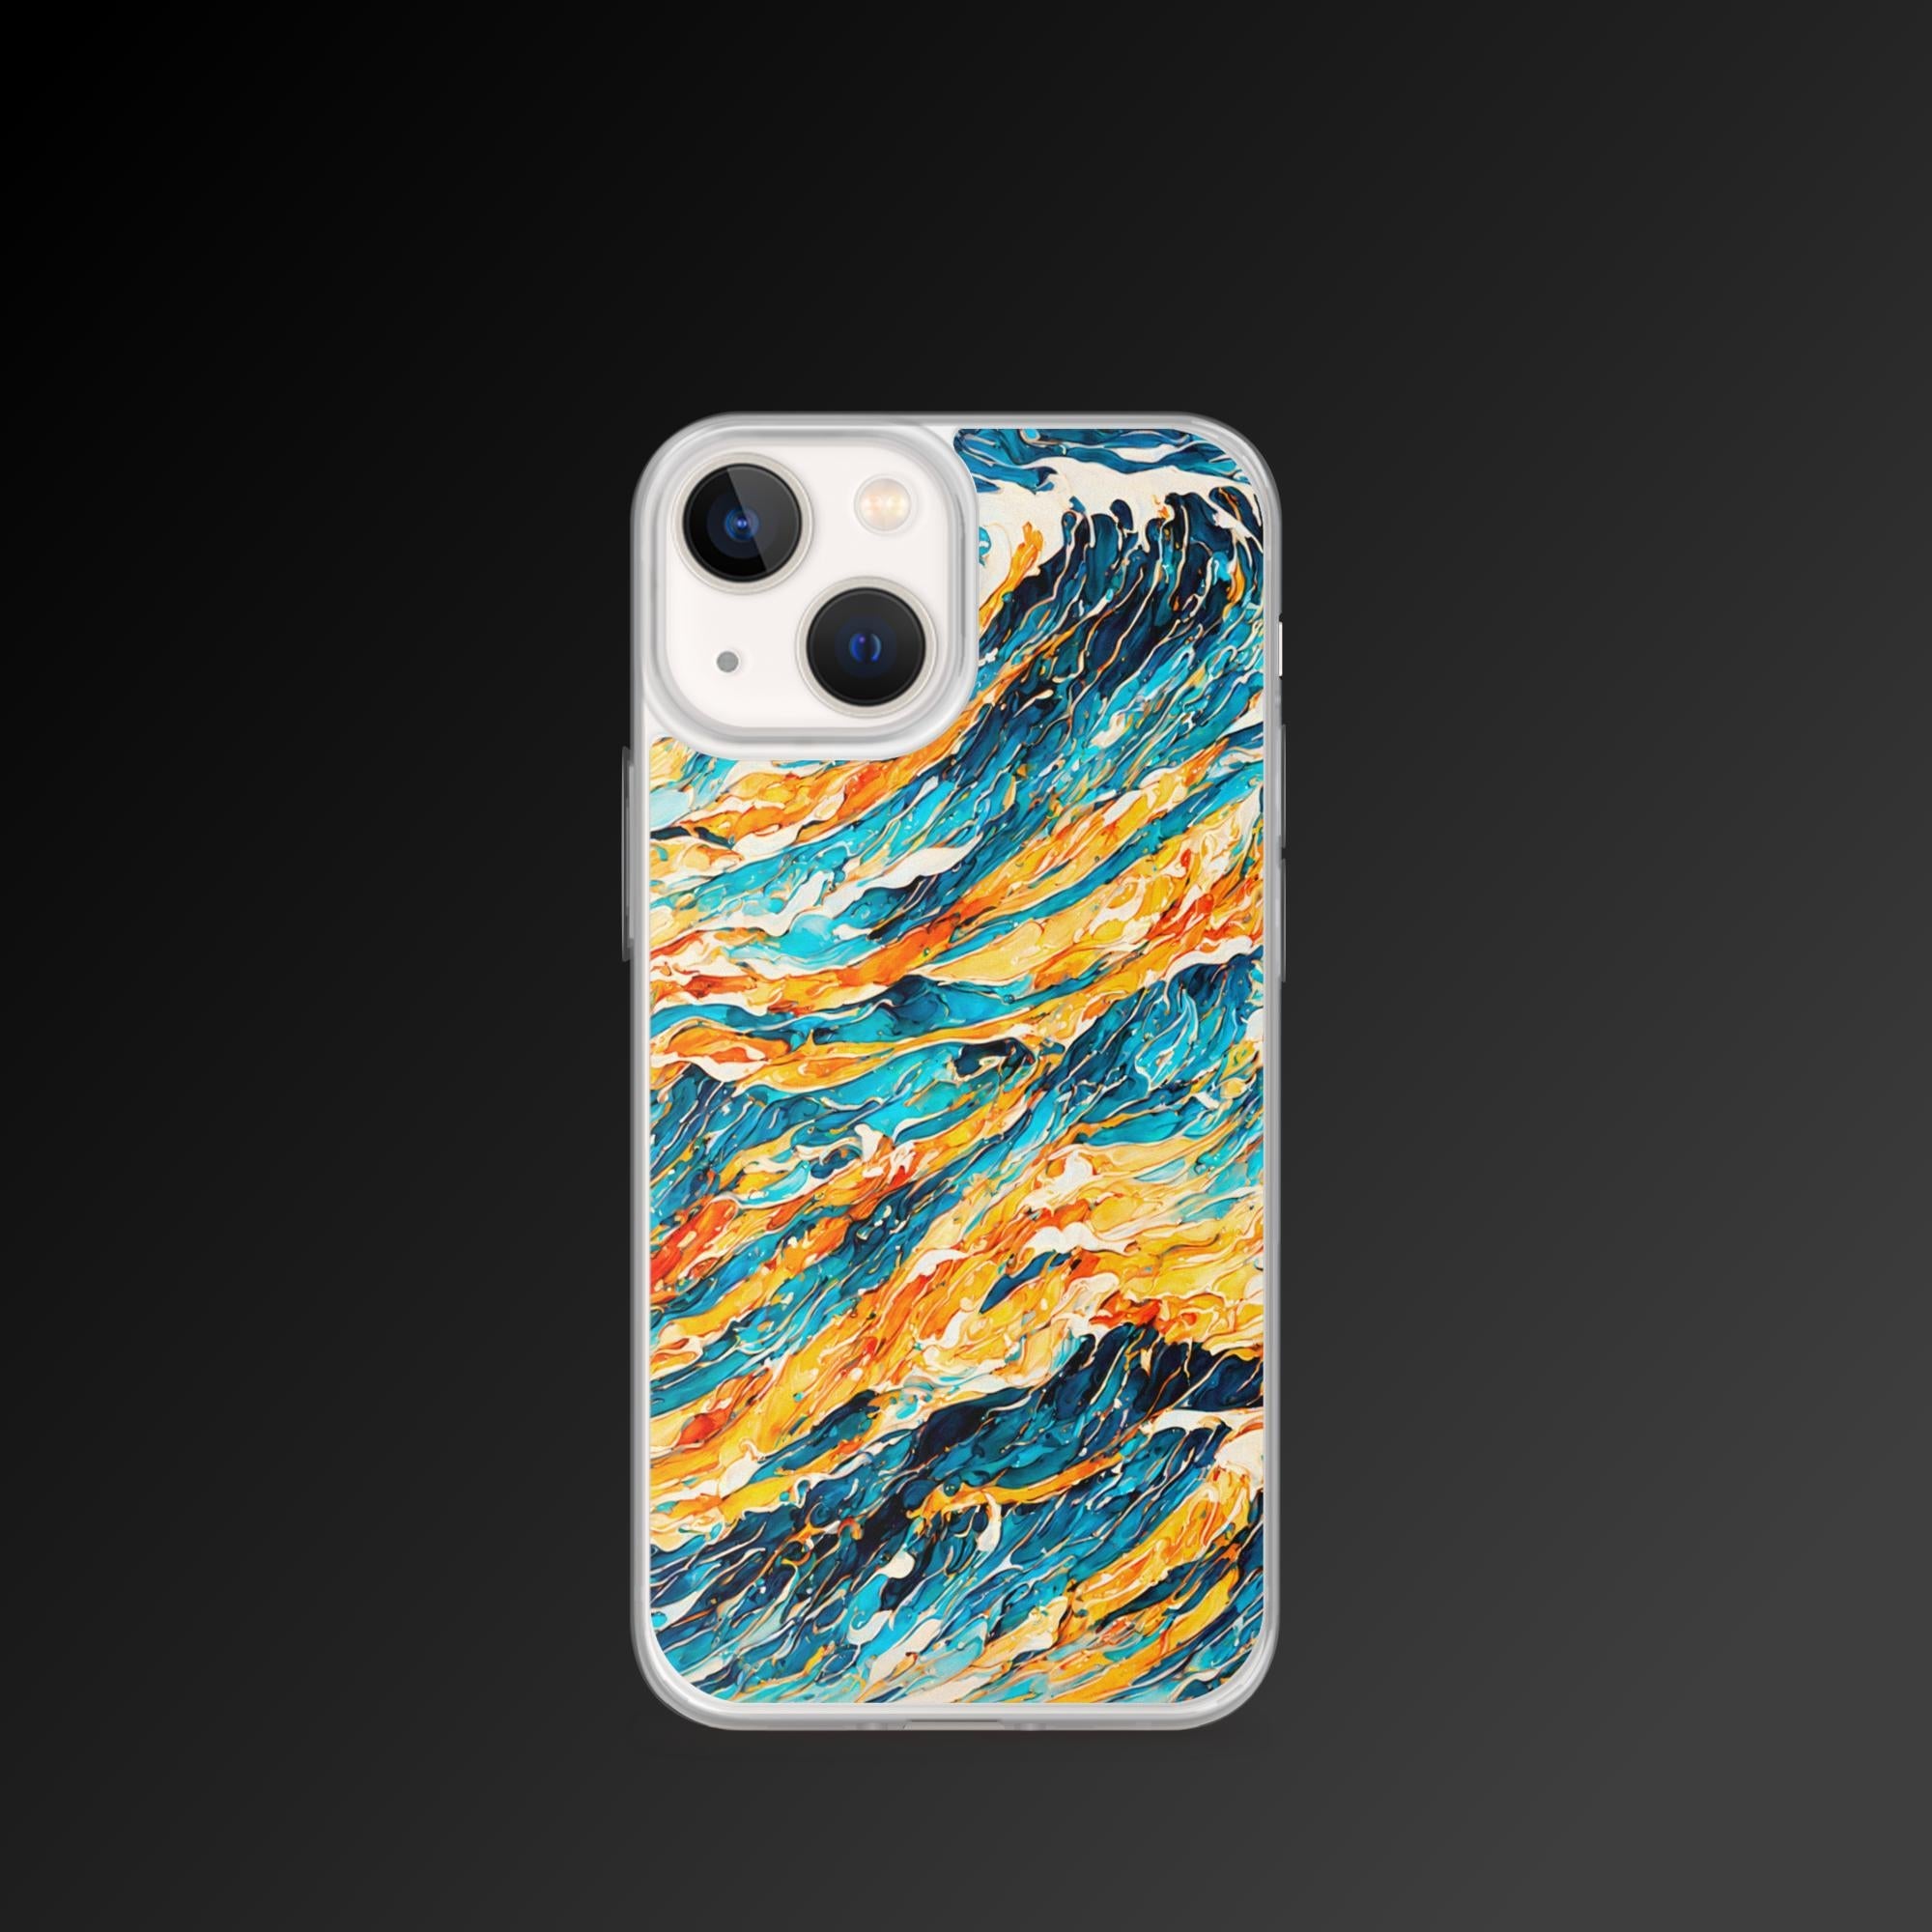 "Bottomless emotions" clear iphone case - Clear iphone case - Ever colorful